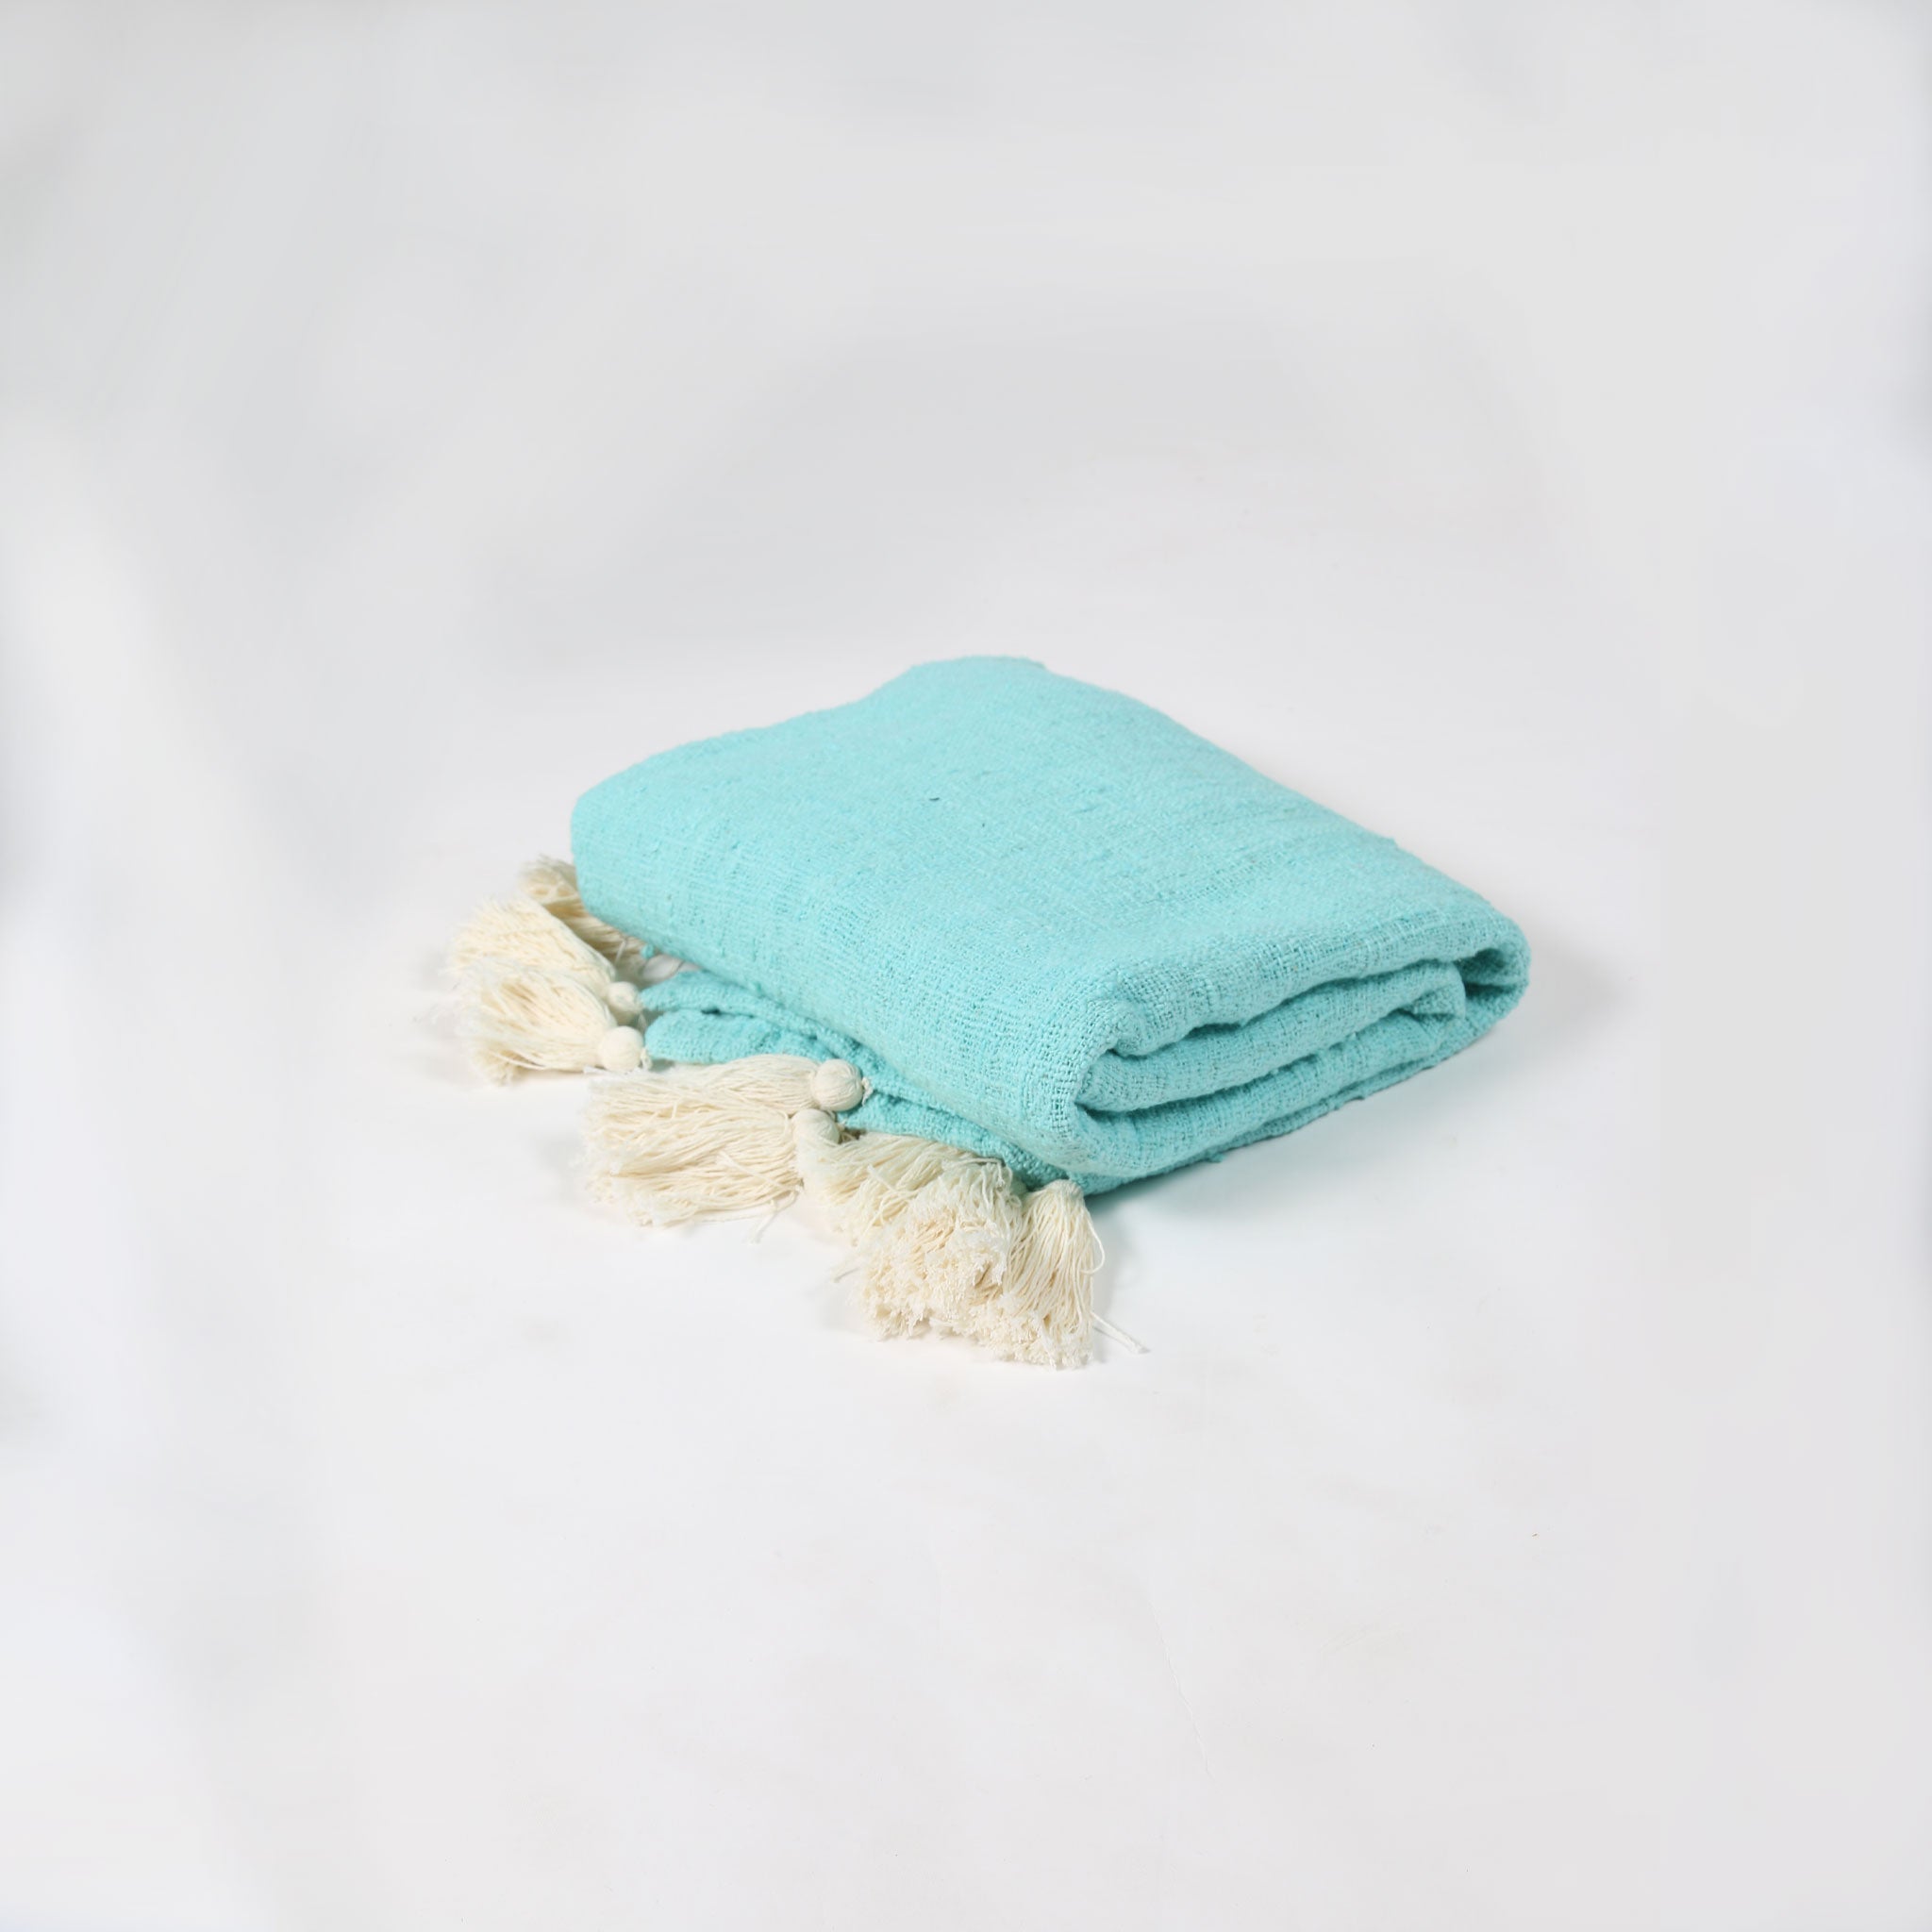 Turquoise Cotton Throw with Cream Tassels